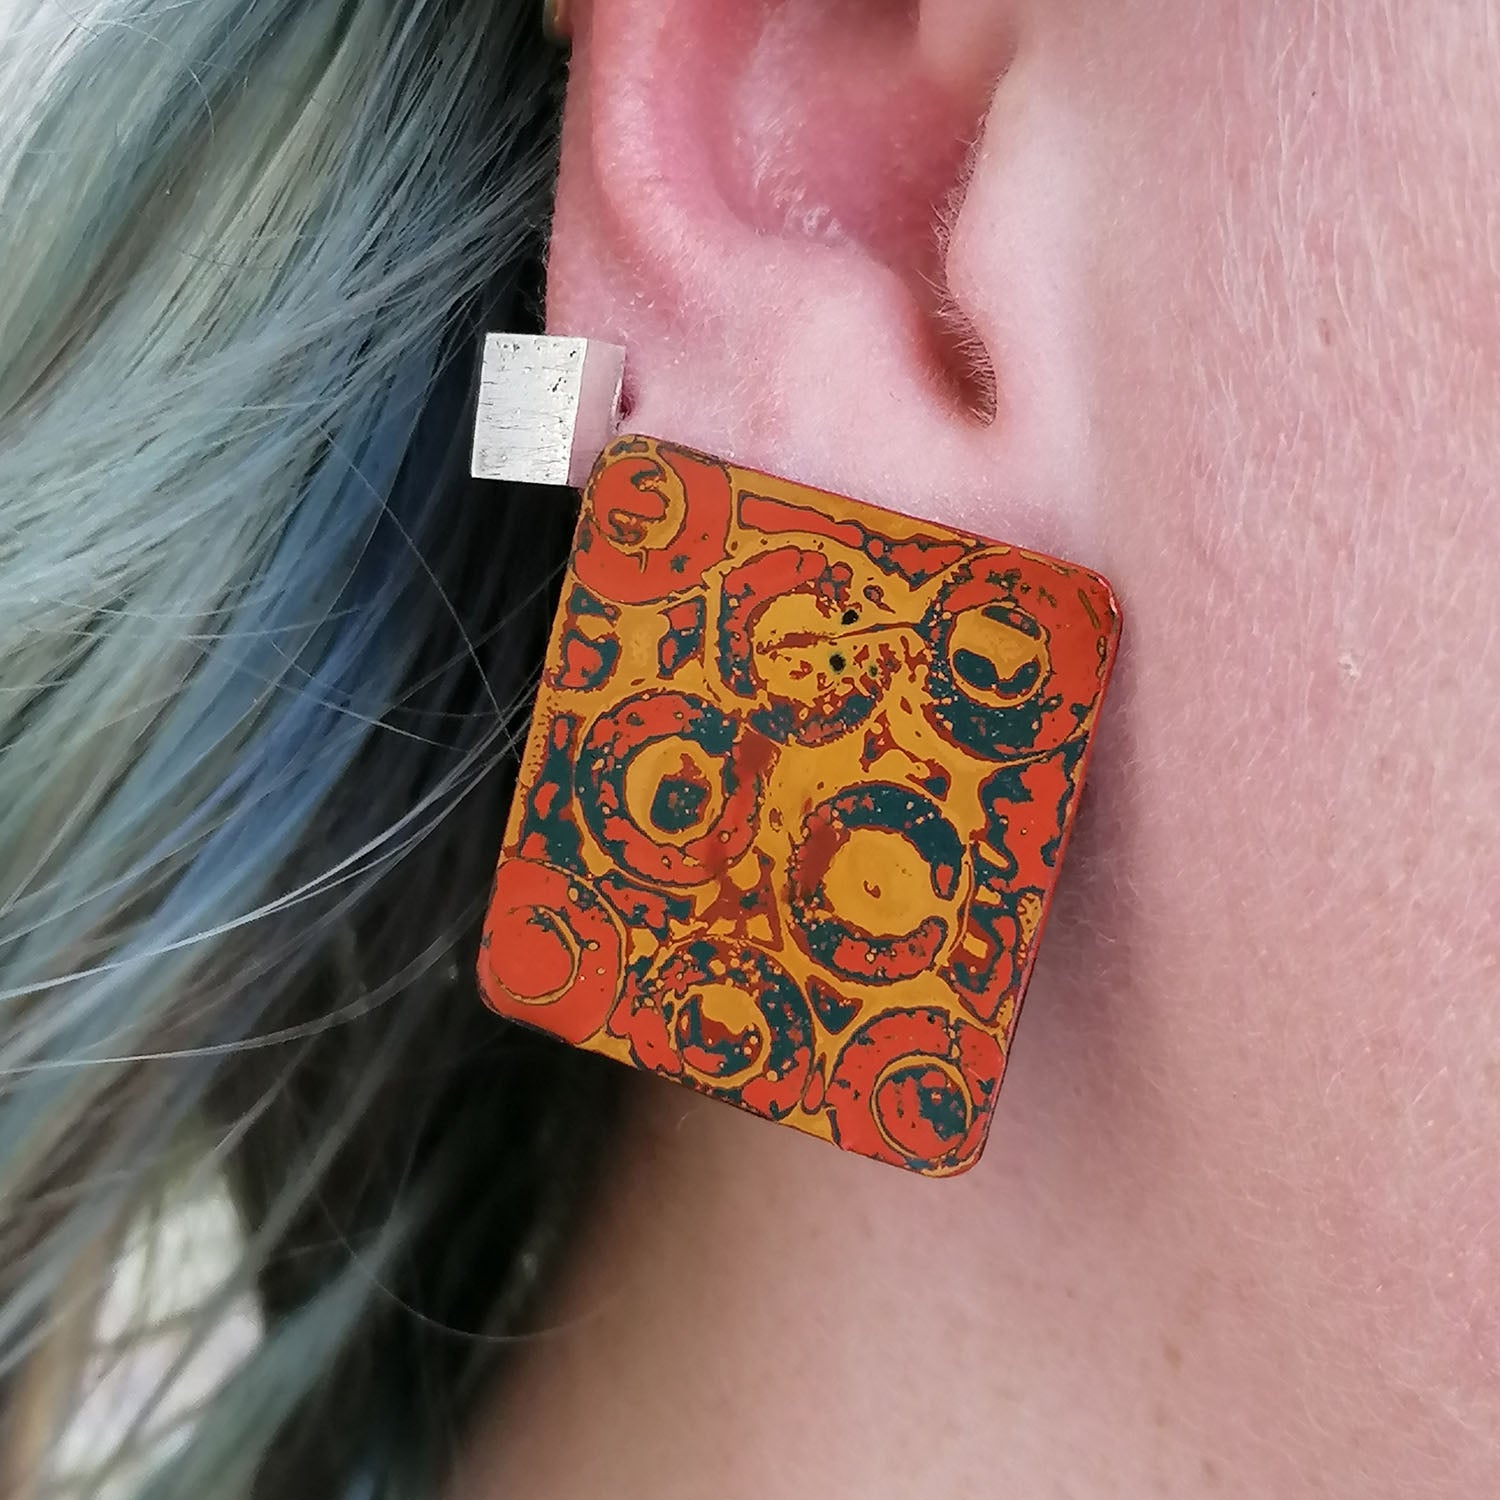 Image shows a pair of soft square earrings being worn by a blue haired model with an abstract pattern in circular pattern in orange, yellow and blue